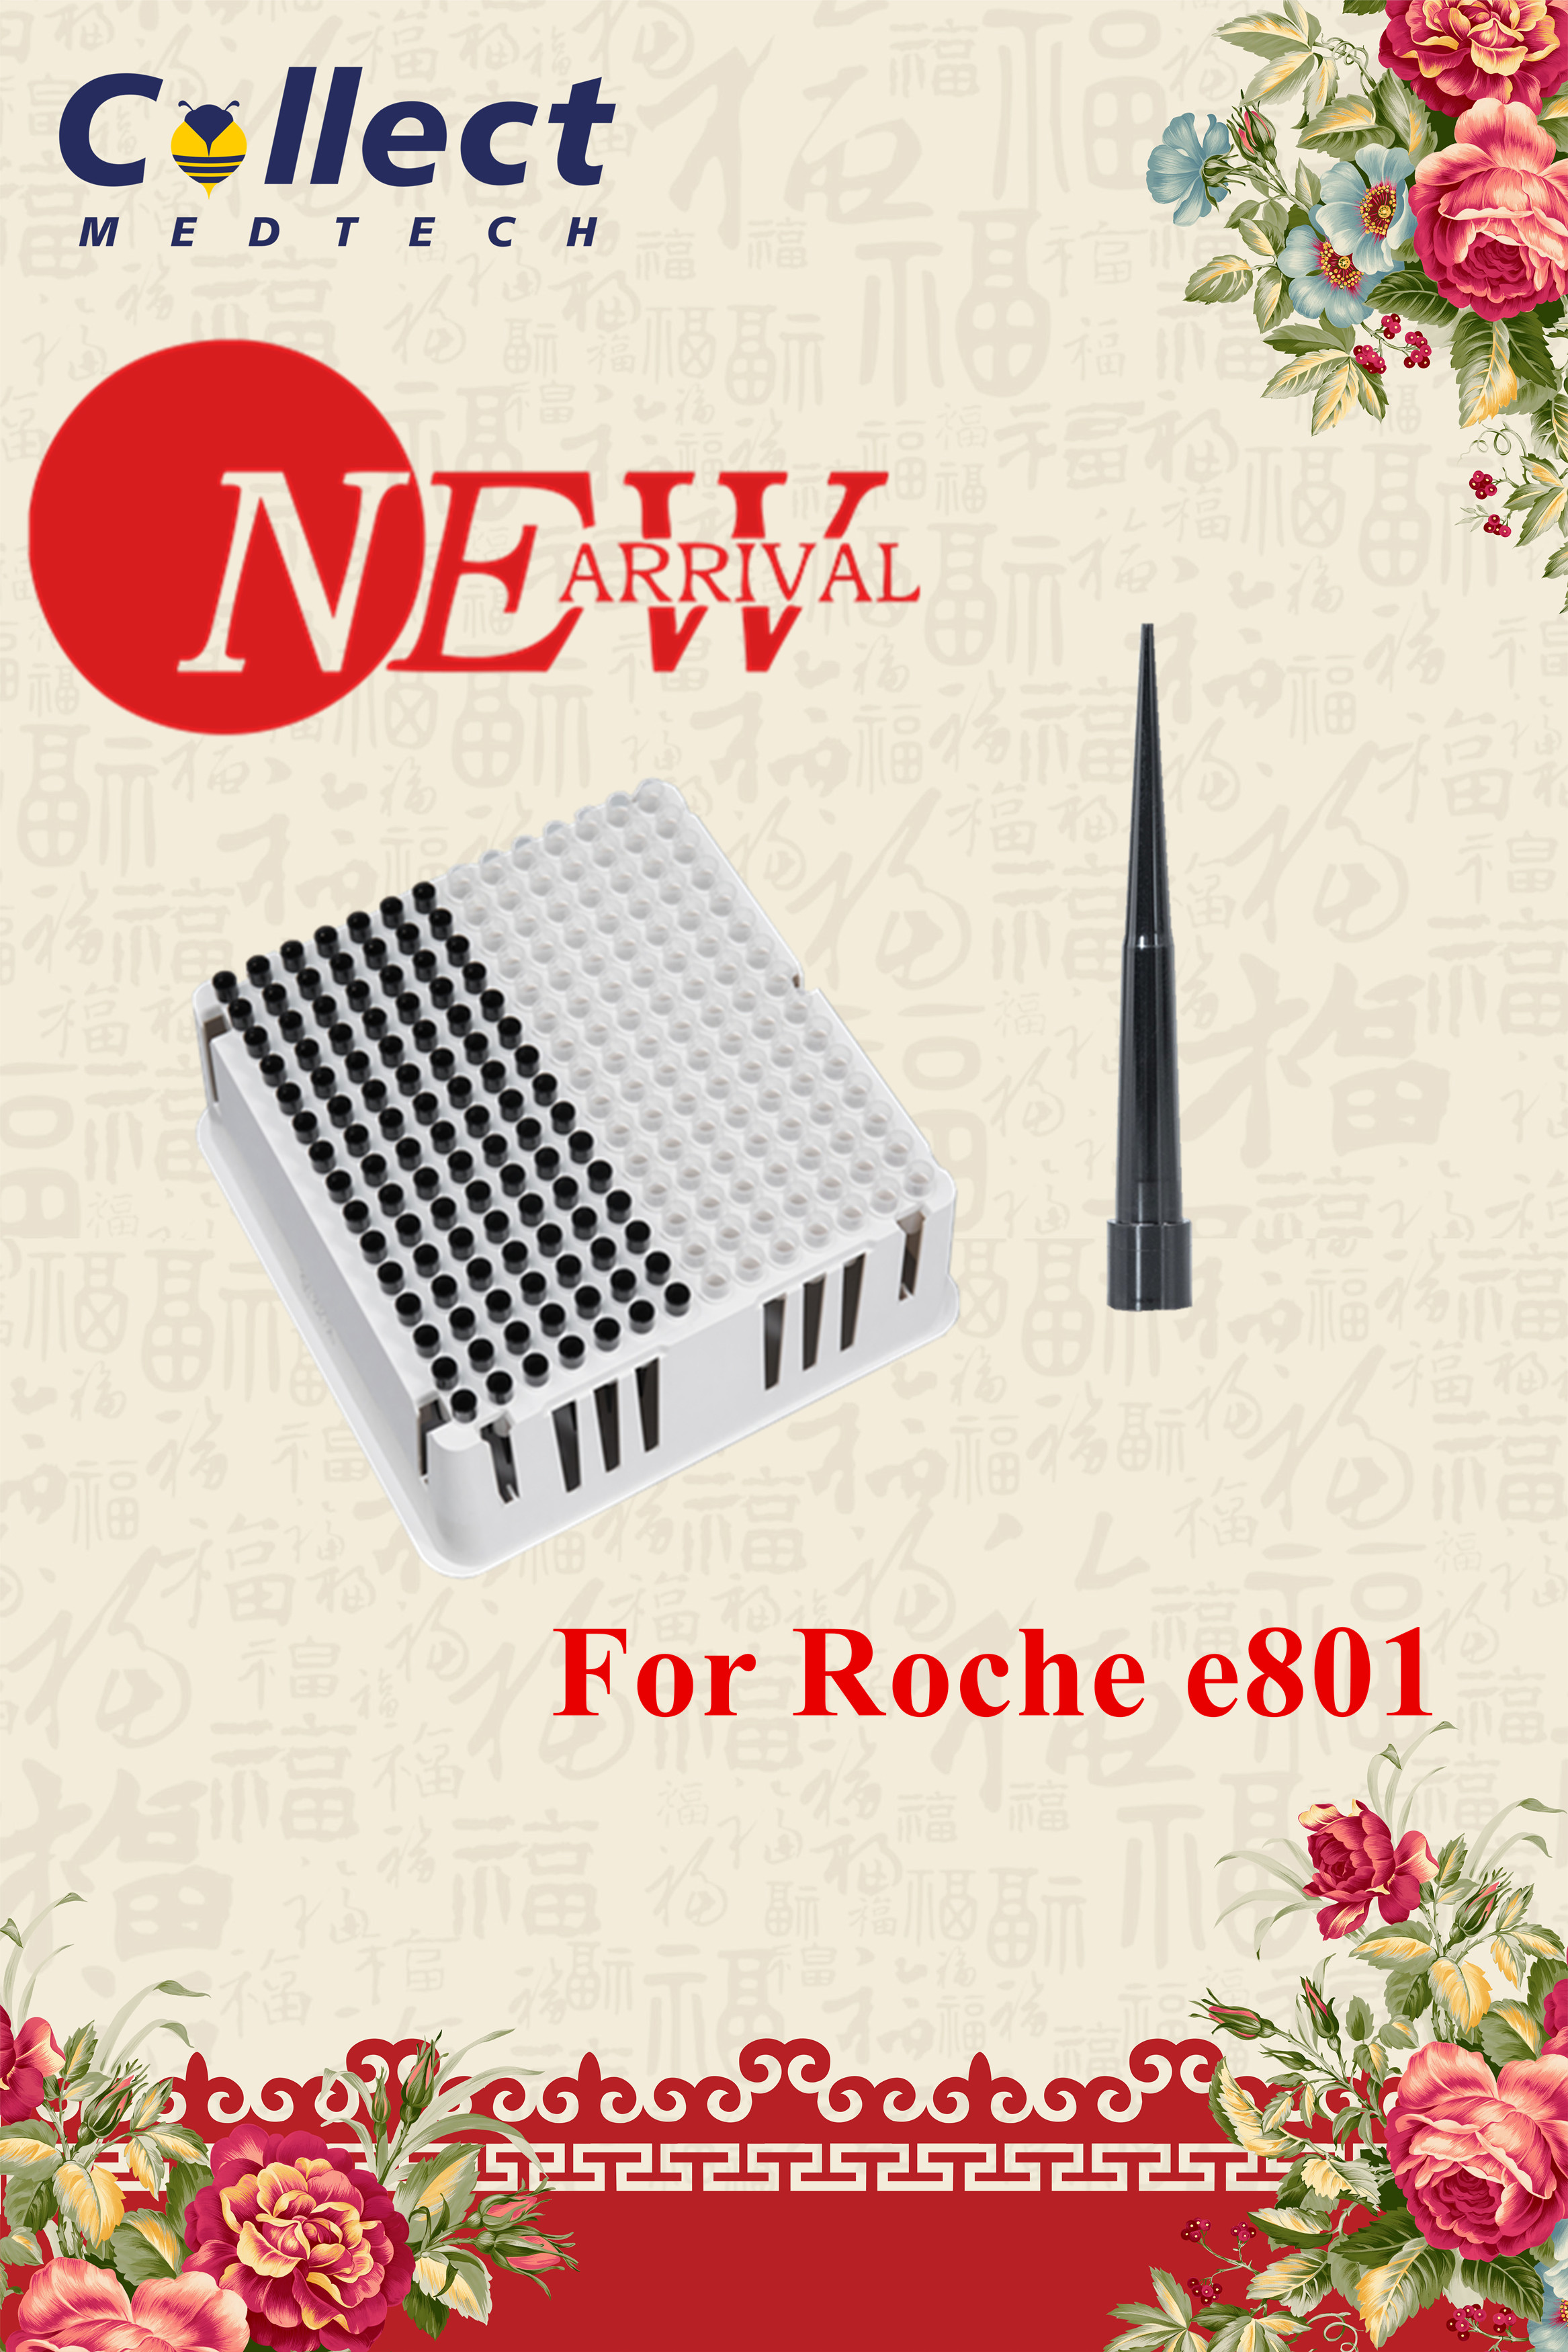 New Arrival – Tray of tips and cups for Roche e801